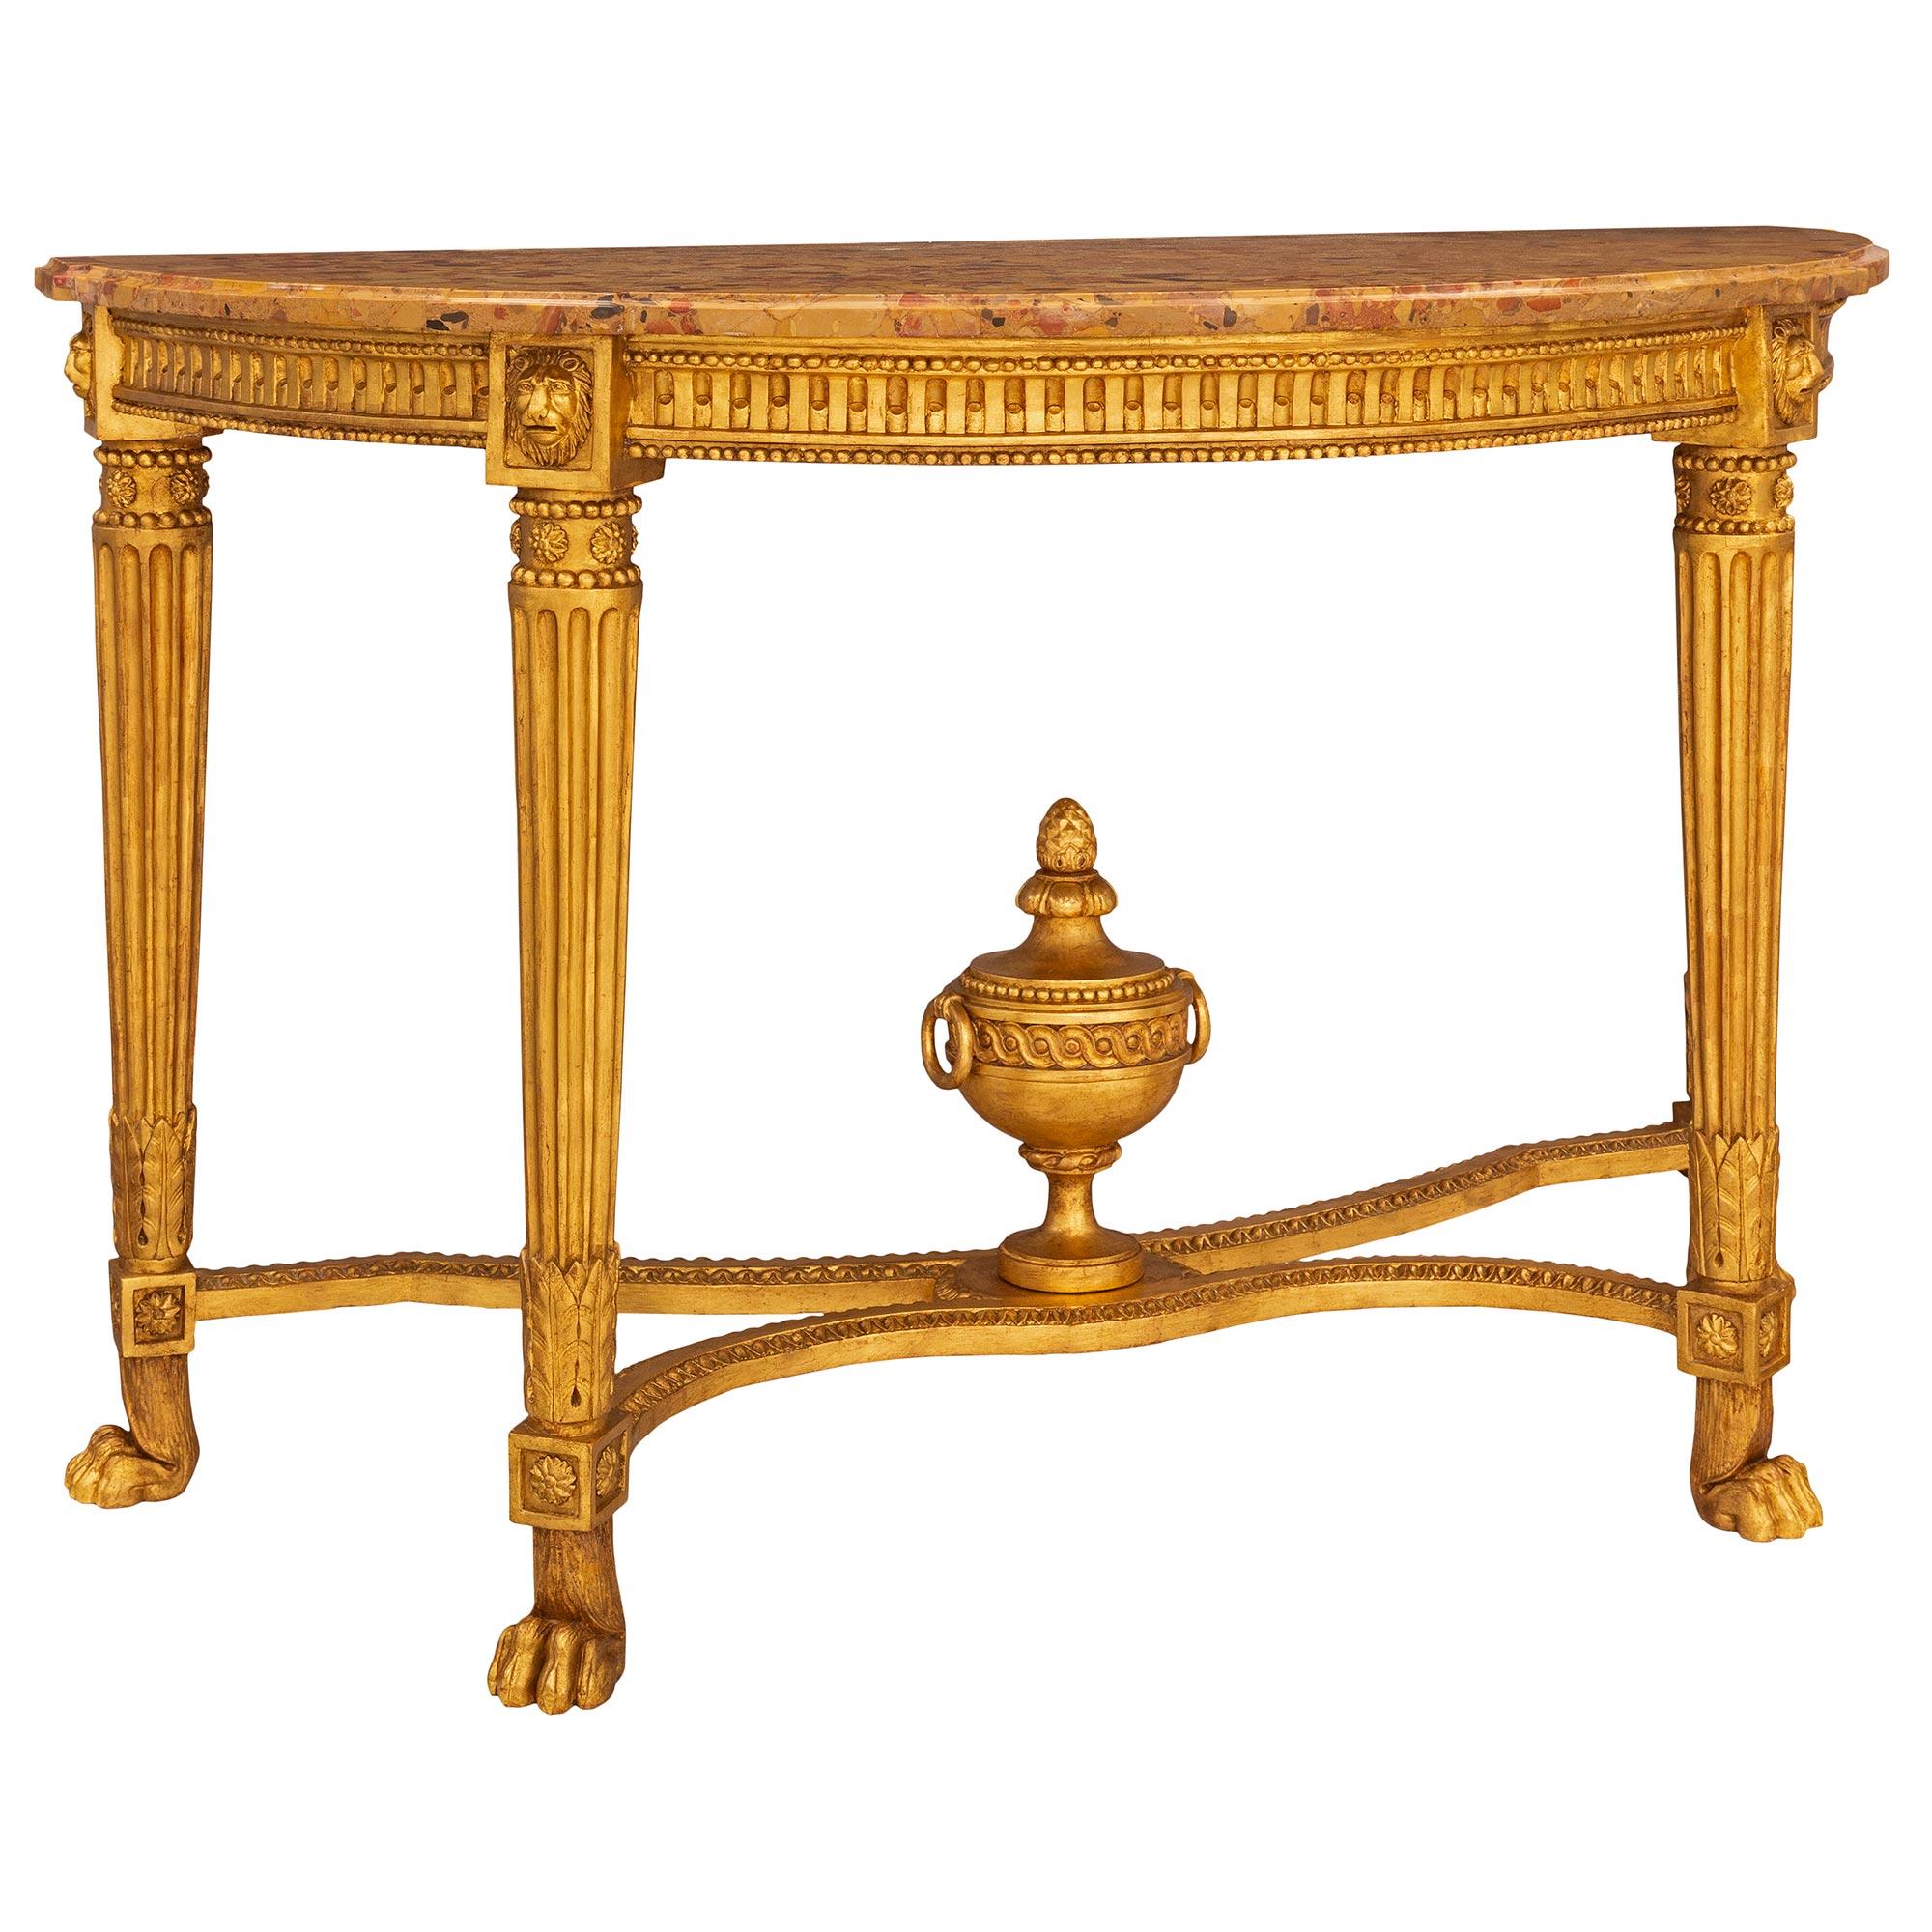 French 18th Century Louis XVI Period Giltwood and Brèche D’alep Marble Console In Good Condition For Sale In West Palm Beach, FL